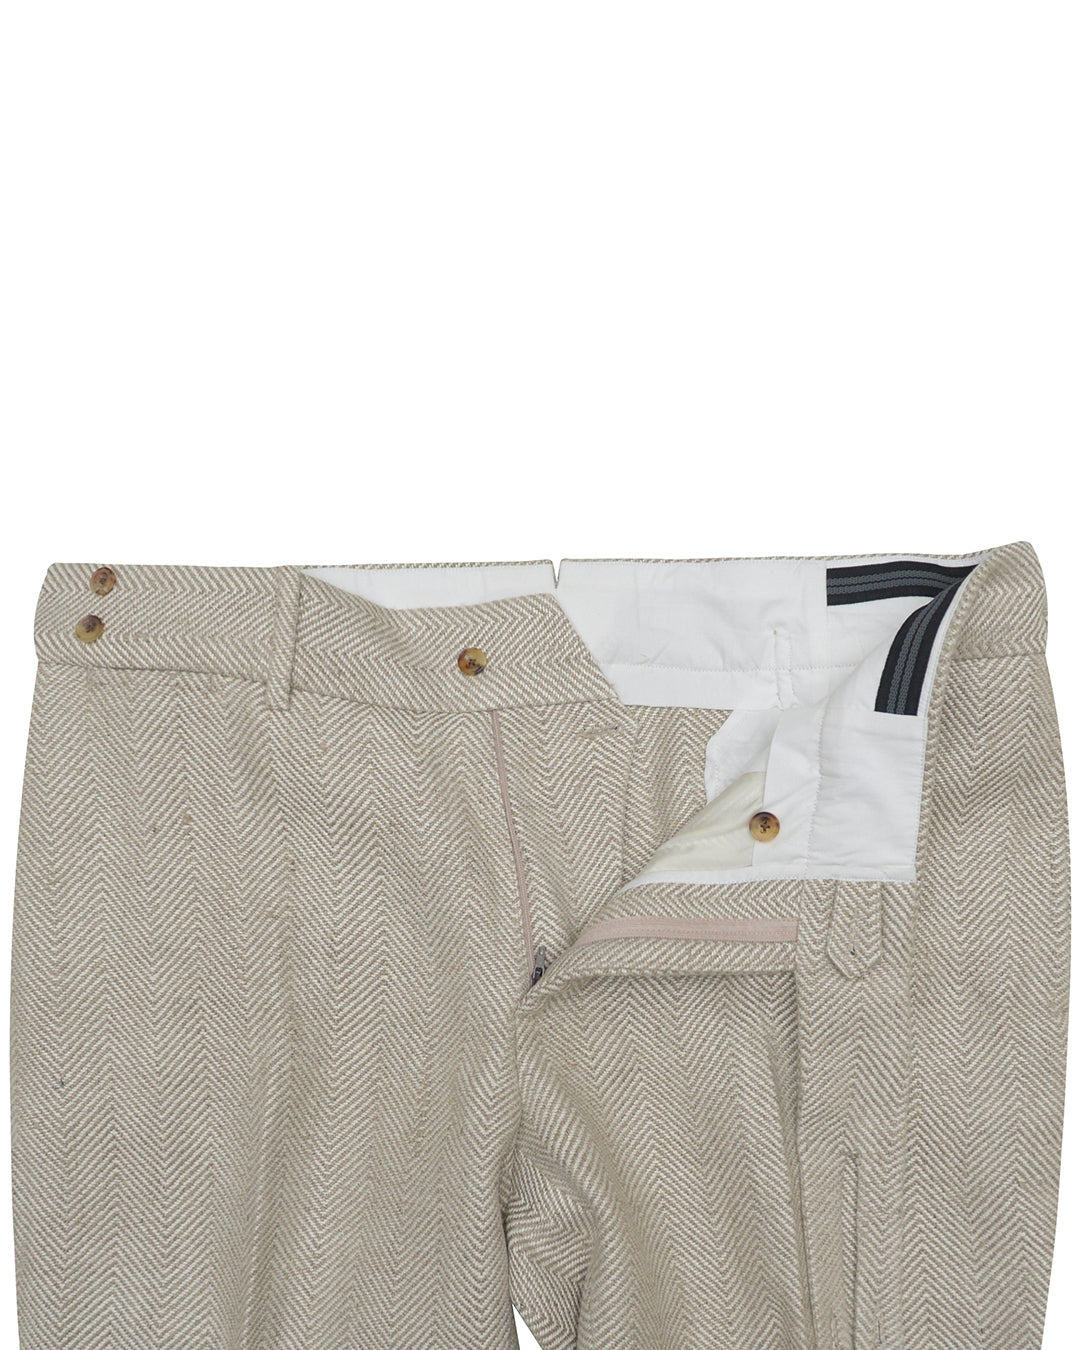 Front view of custom linen pants for men by Luxire in golden tan